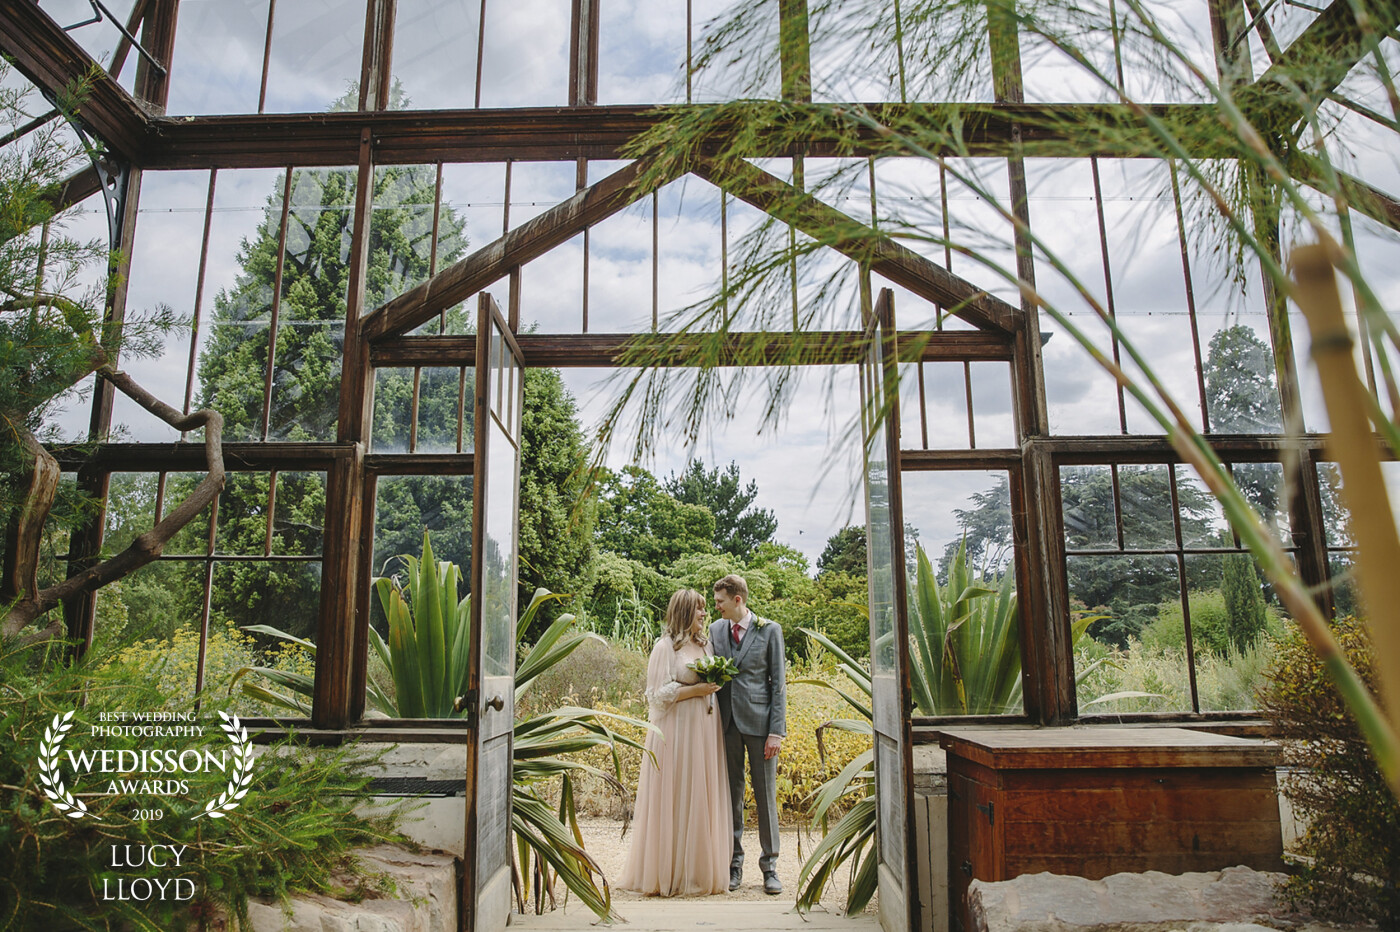 A moment from a lovely wedding at the botanical gardens in Cambridge.  <br />
We were experiencing a heat wave in the UK, and a lot of the grass was yellow, <br />
so I thought it would be a good idea to use the green houses in their portrait photos. 